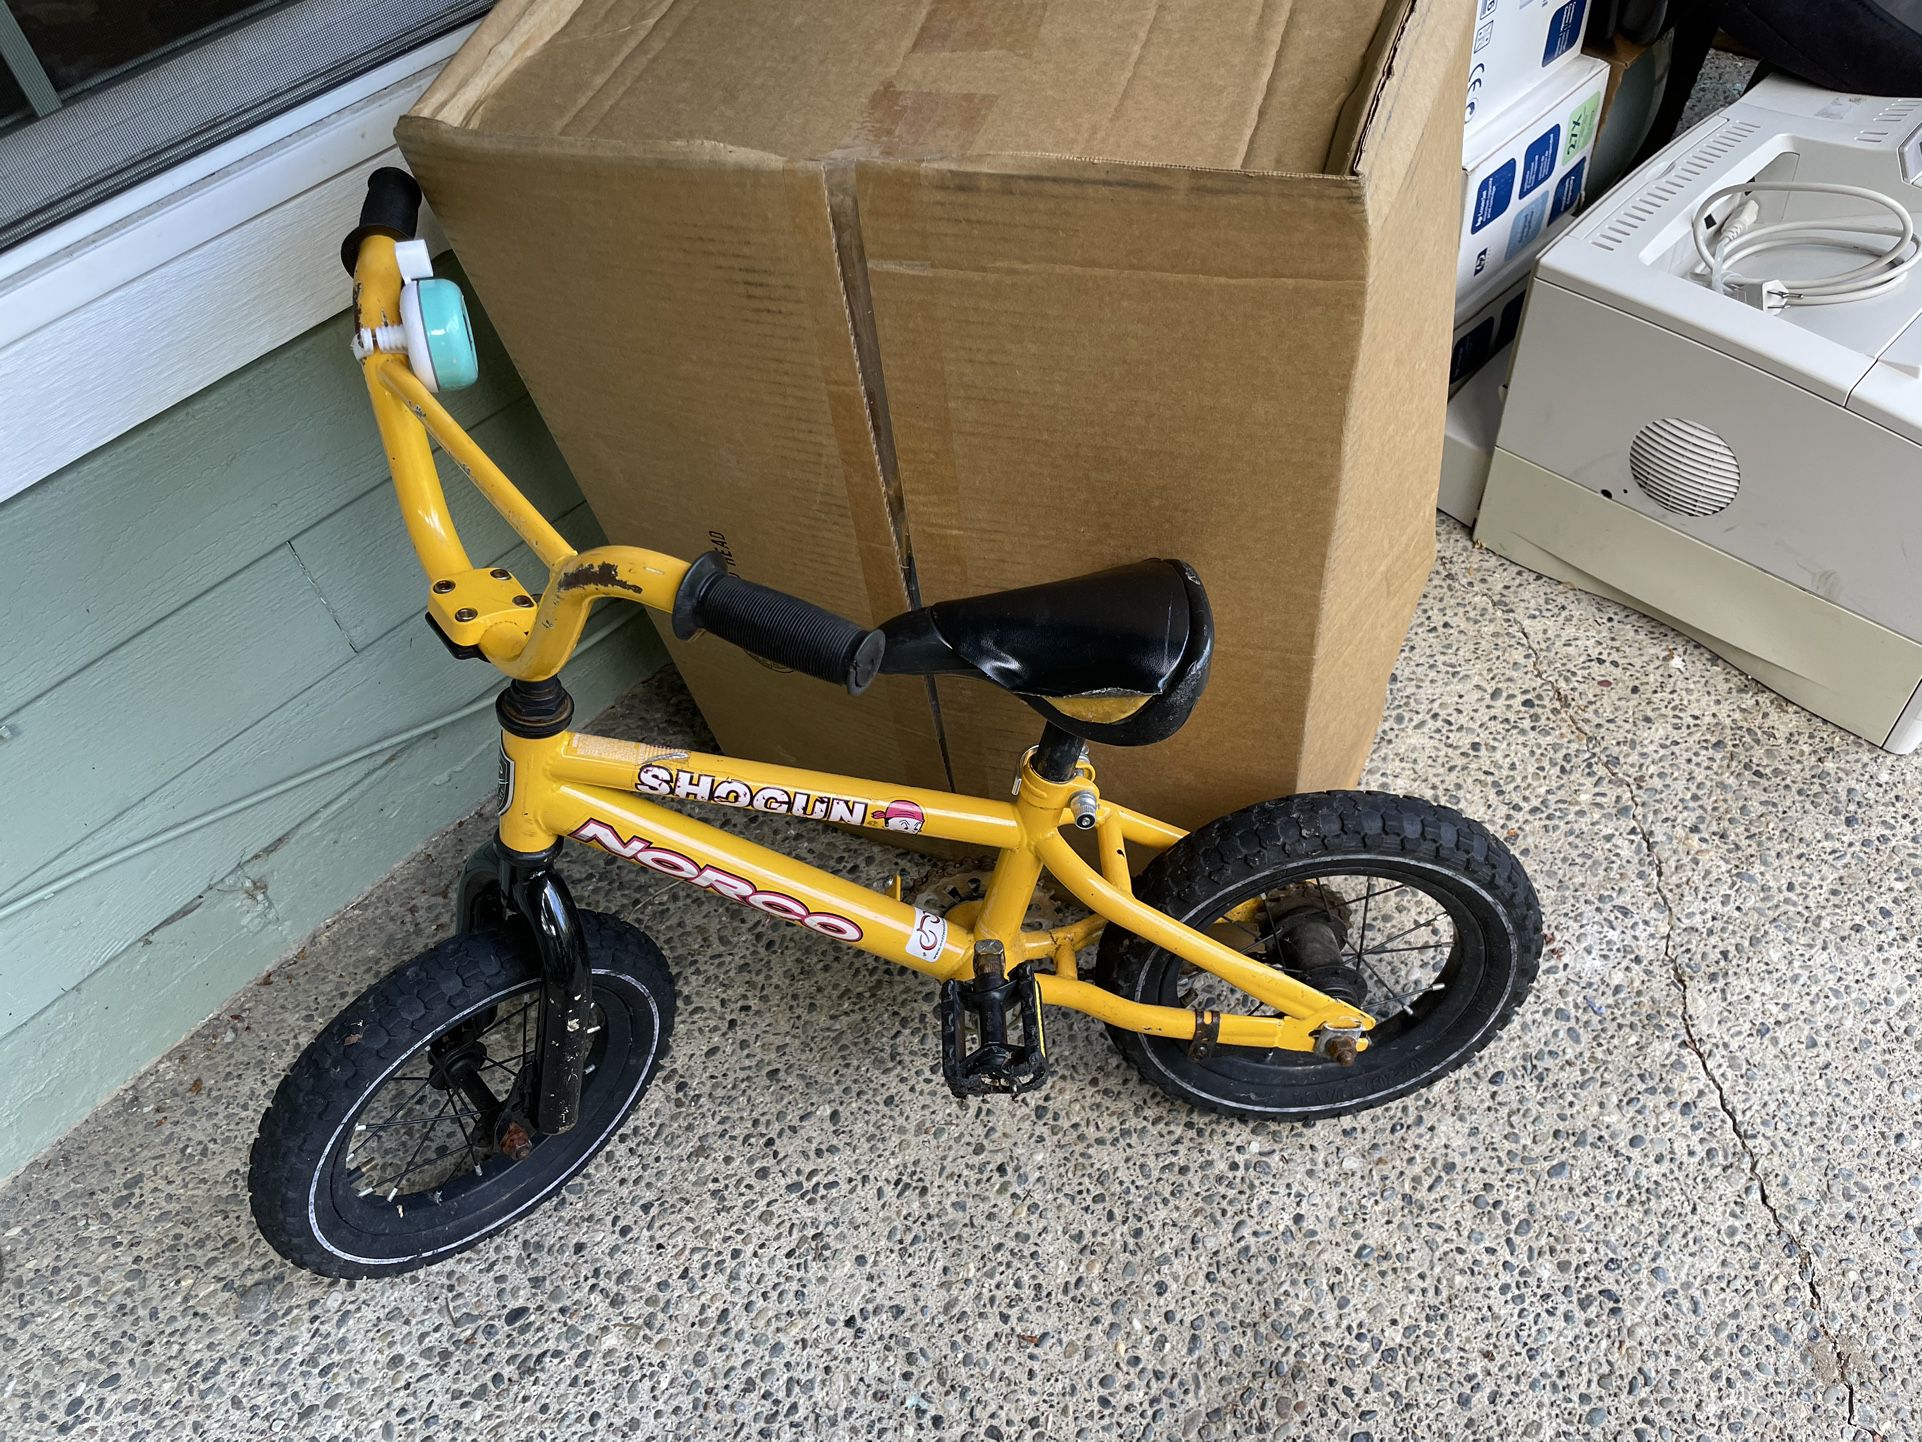 Norco Pedal Bike - Toddler/young Kid